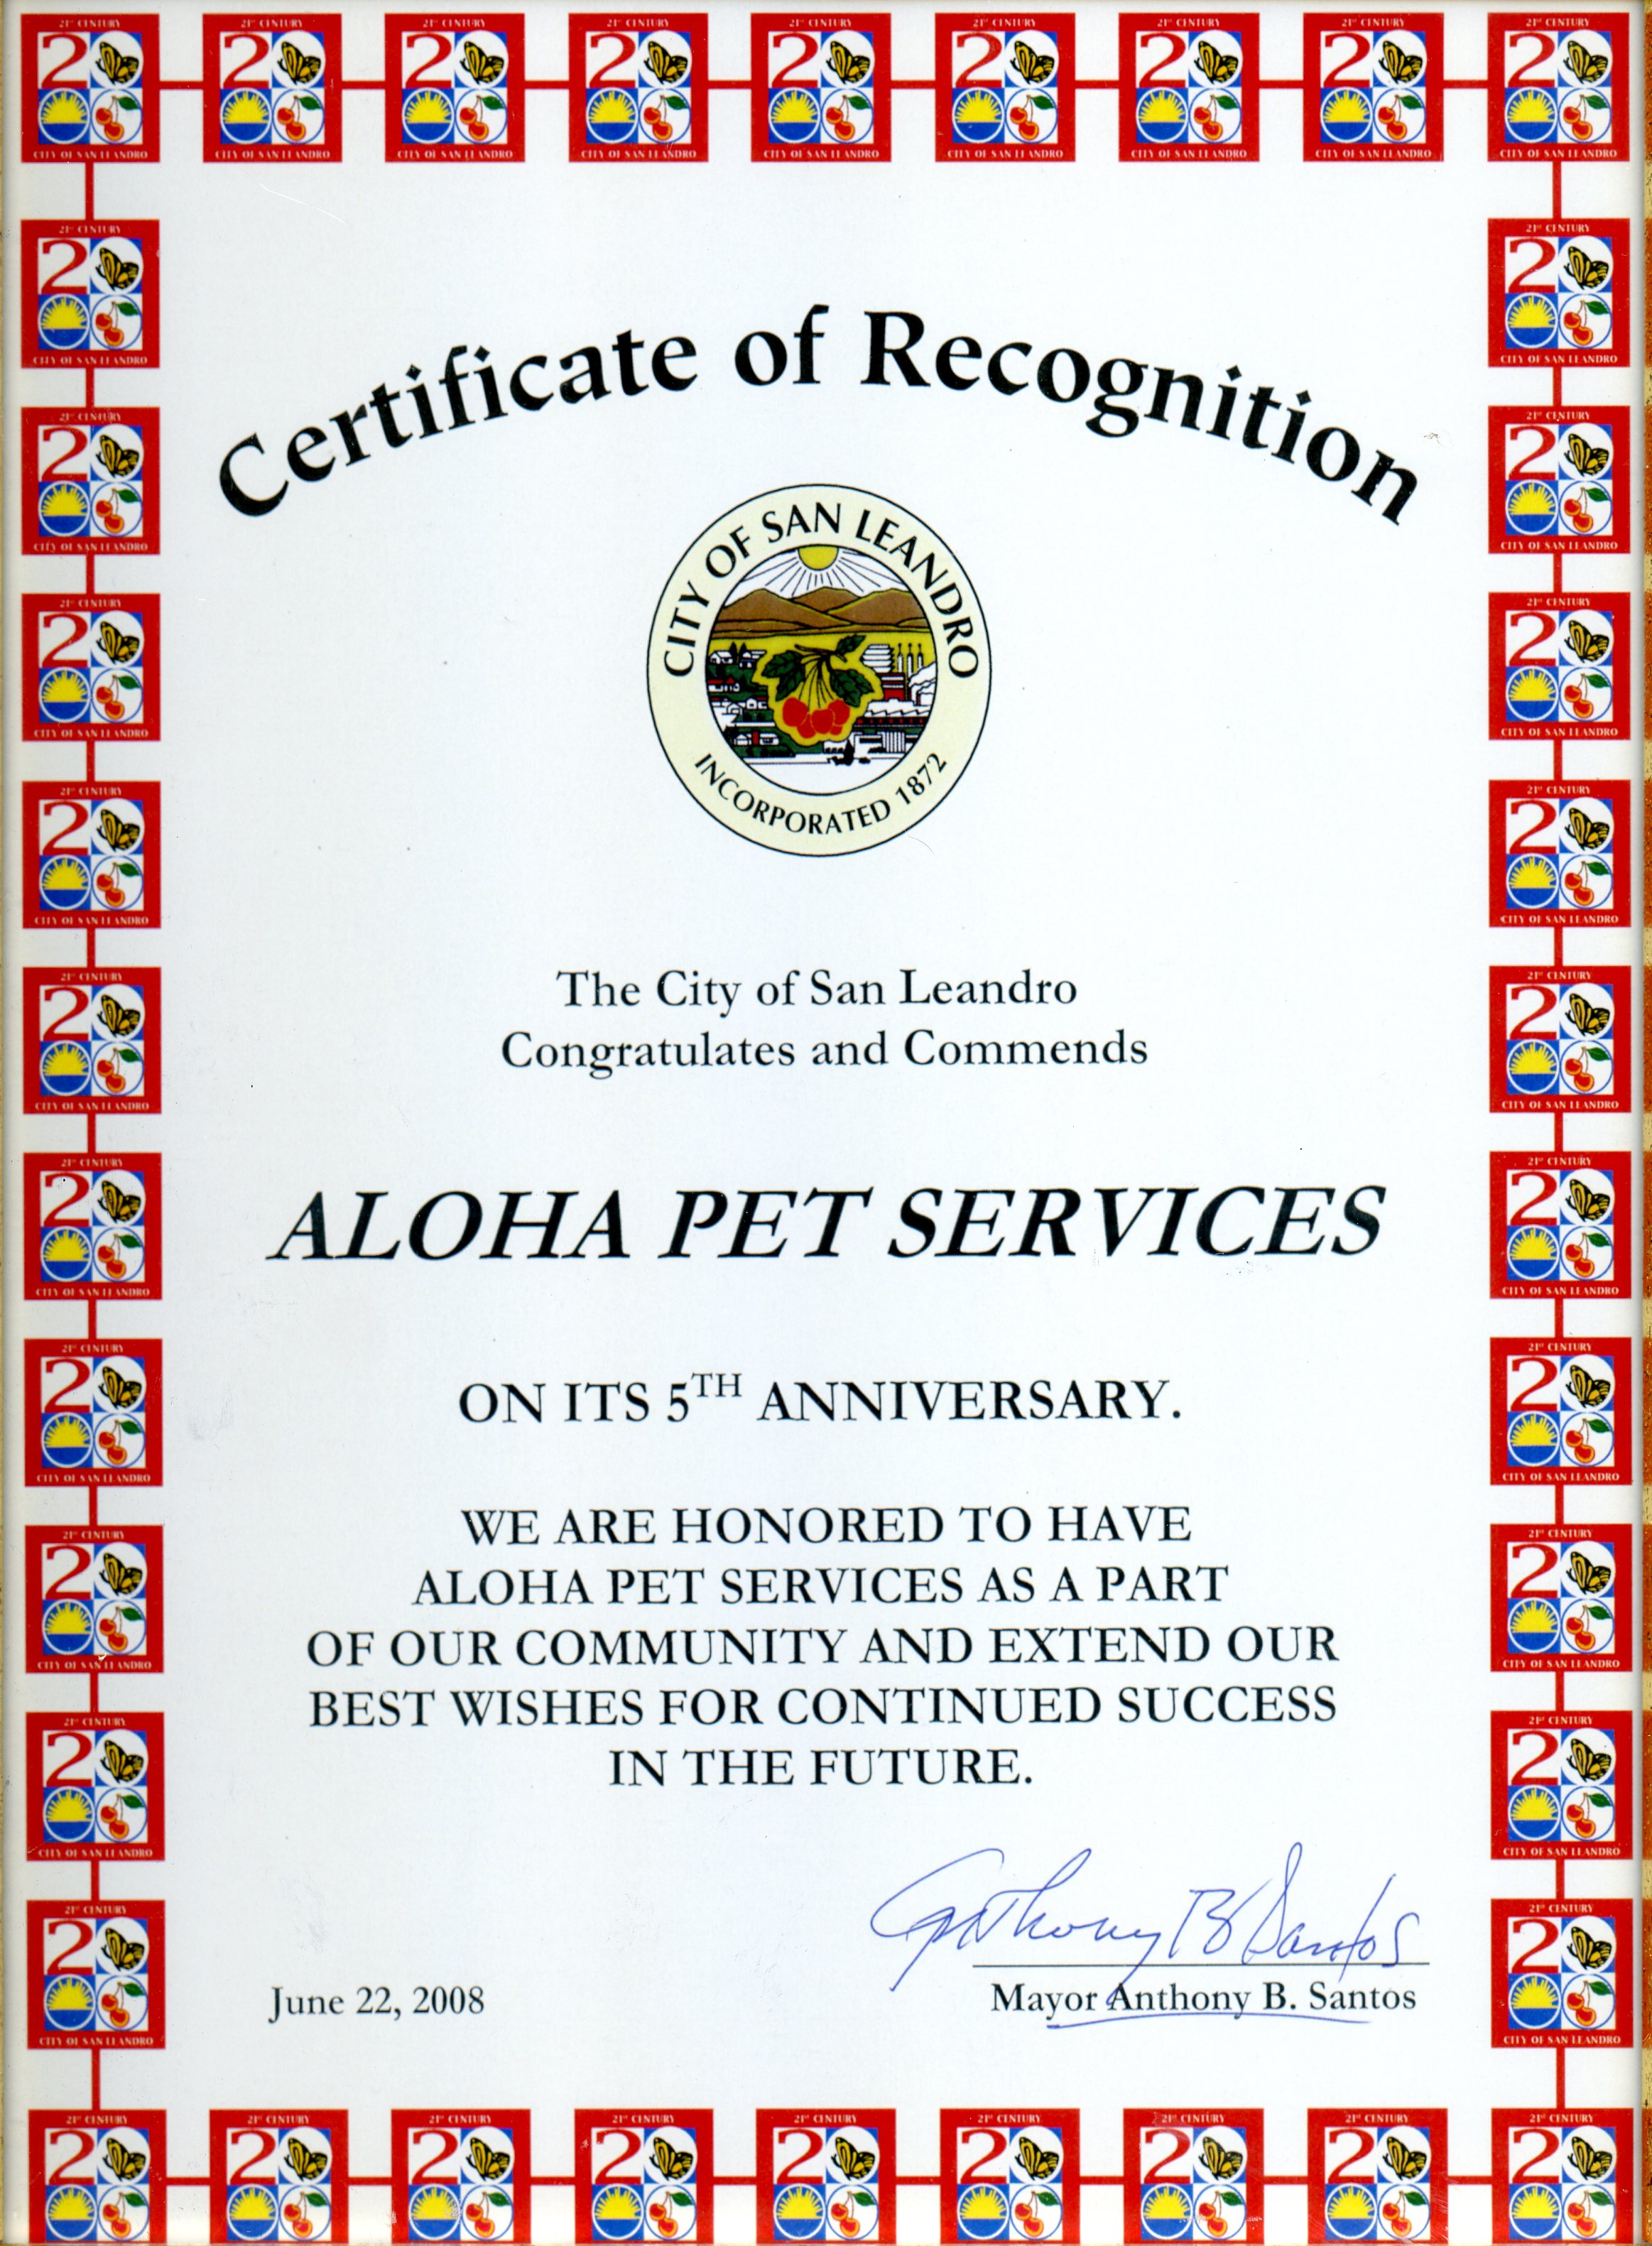 The City of San Leandro 5th Anniversary Certificate of Recognition